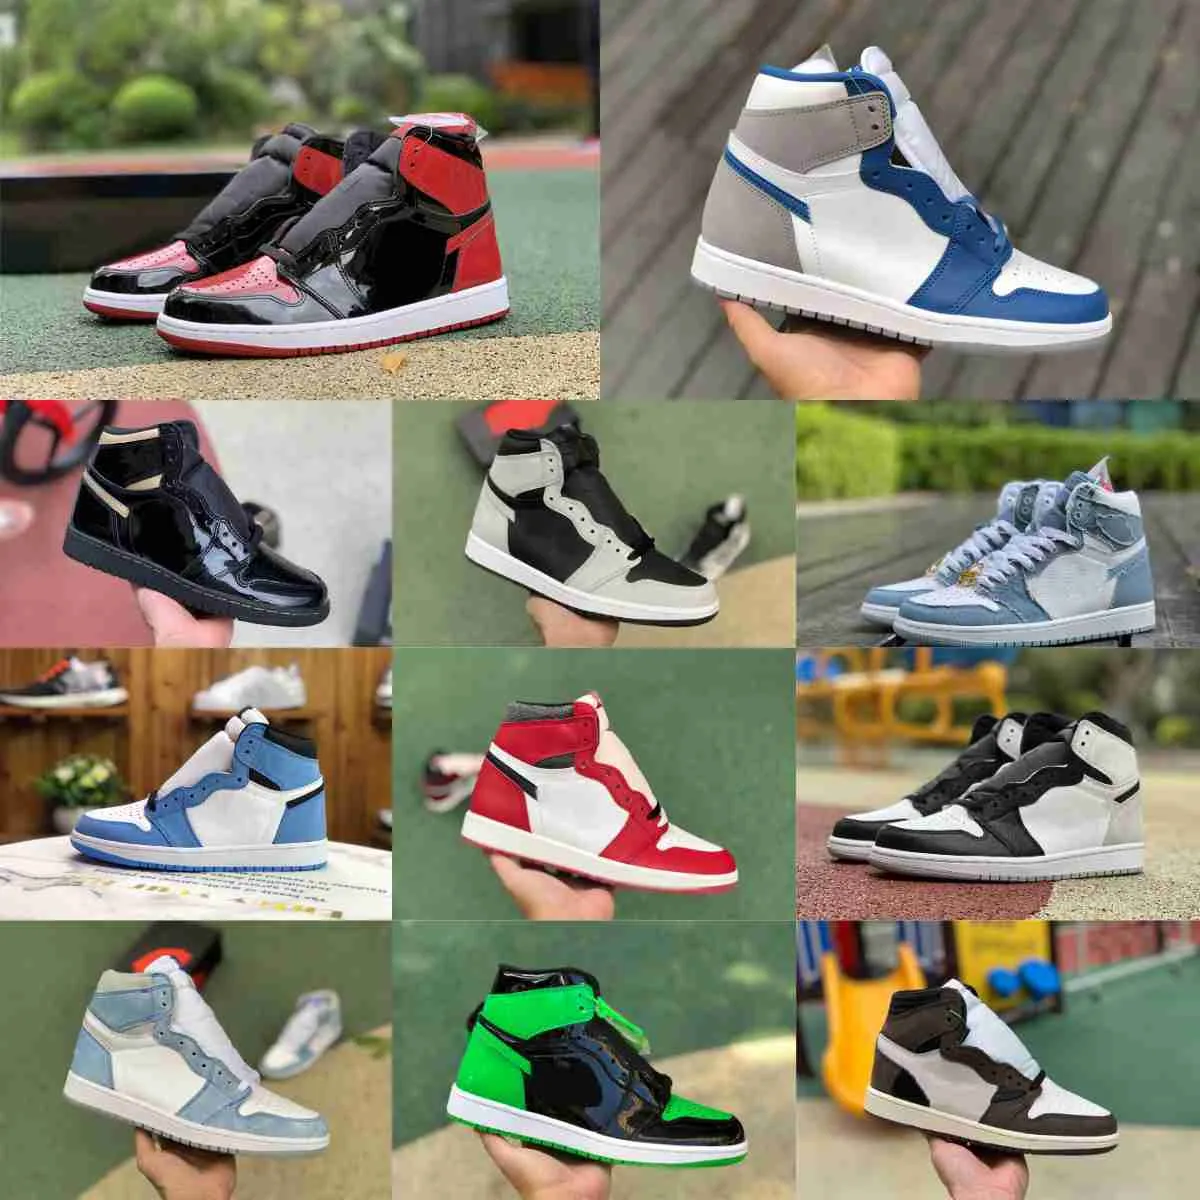 Chicago Lost Found Jumpman 1 1s Basketball Shoes True Turbo Blue Pine Green Gorge Denim Visionaire Stage Haze Hyper Royal Bred Hack TWIST Designer Sports Sneakers